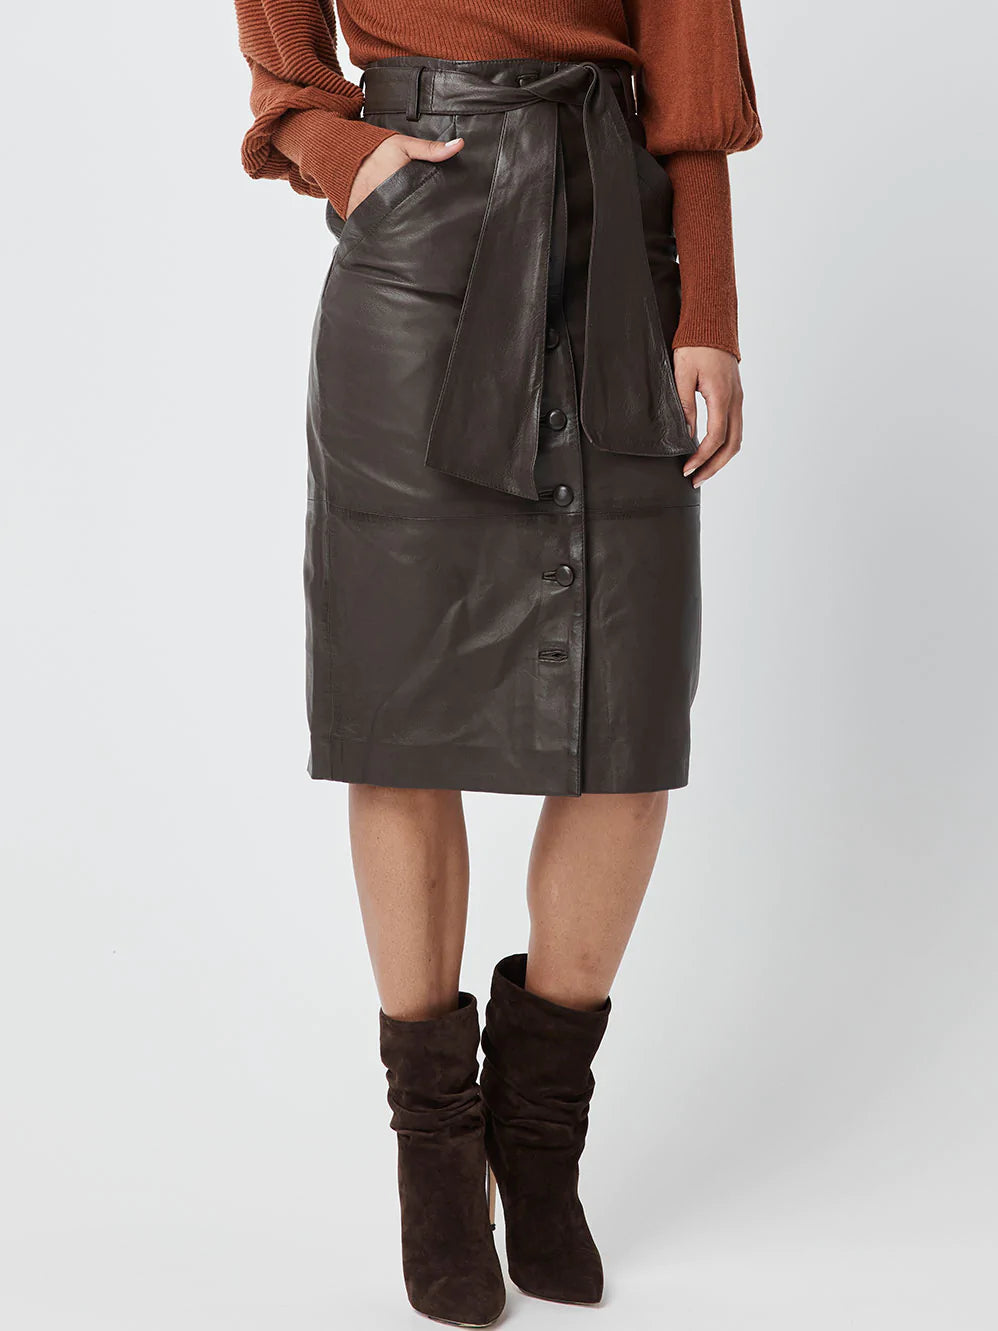 ONCE WAS Leather Chocolate Skirt